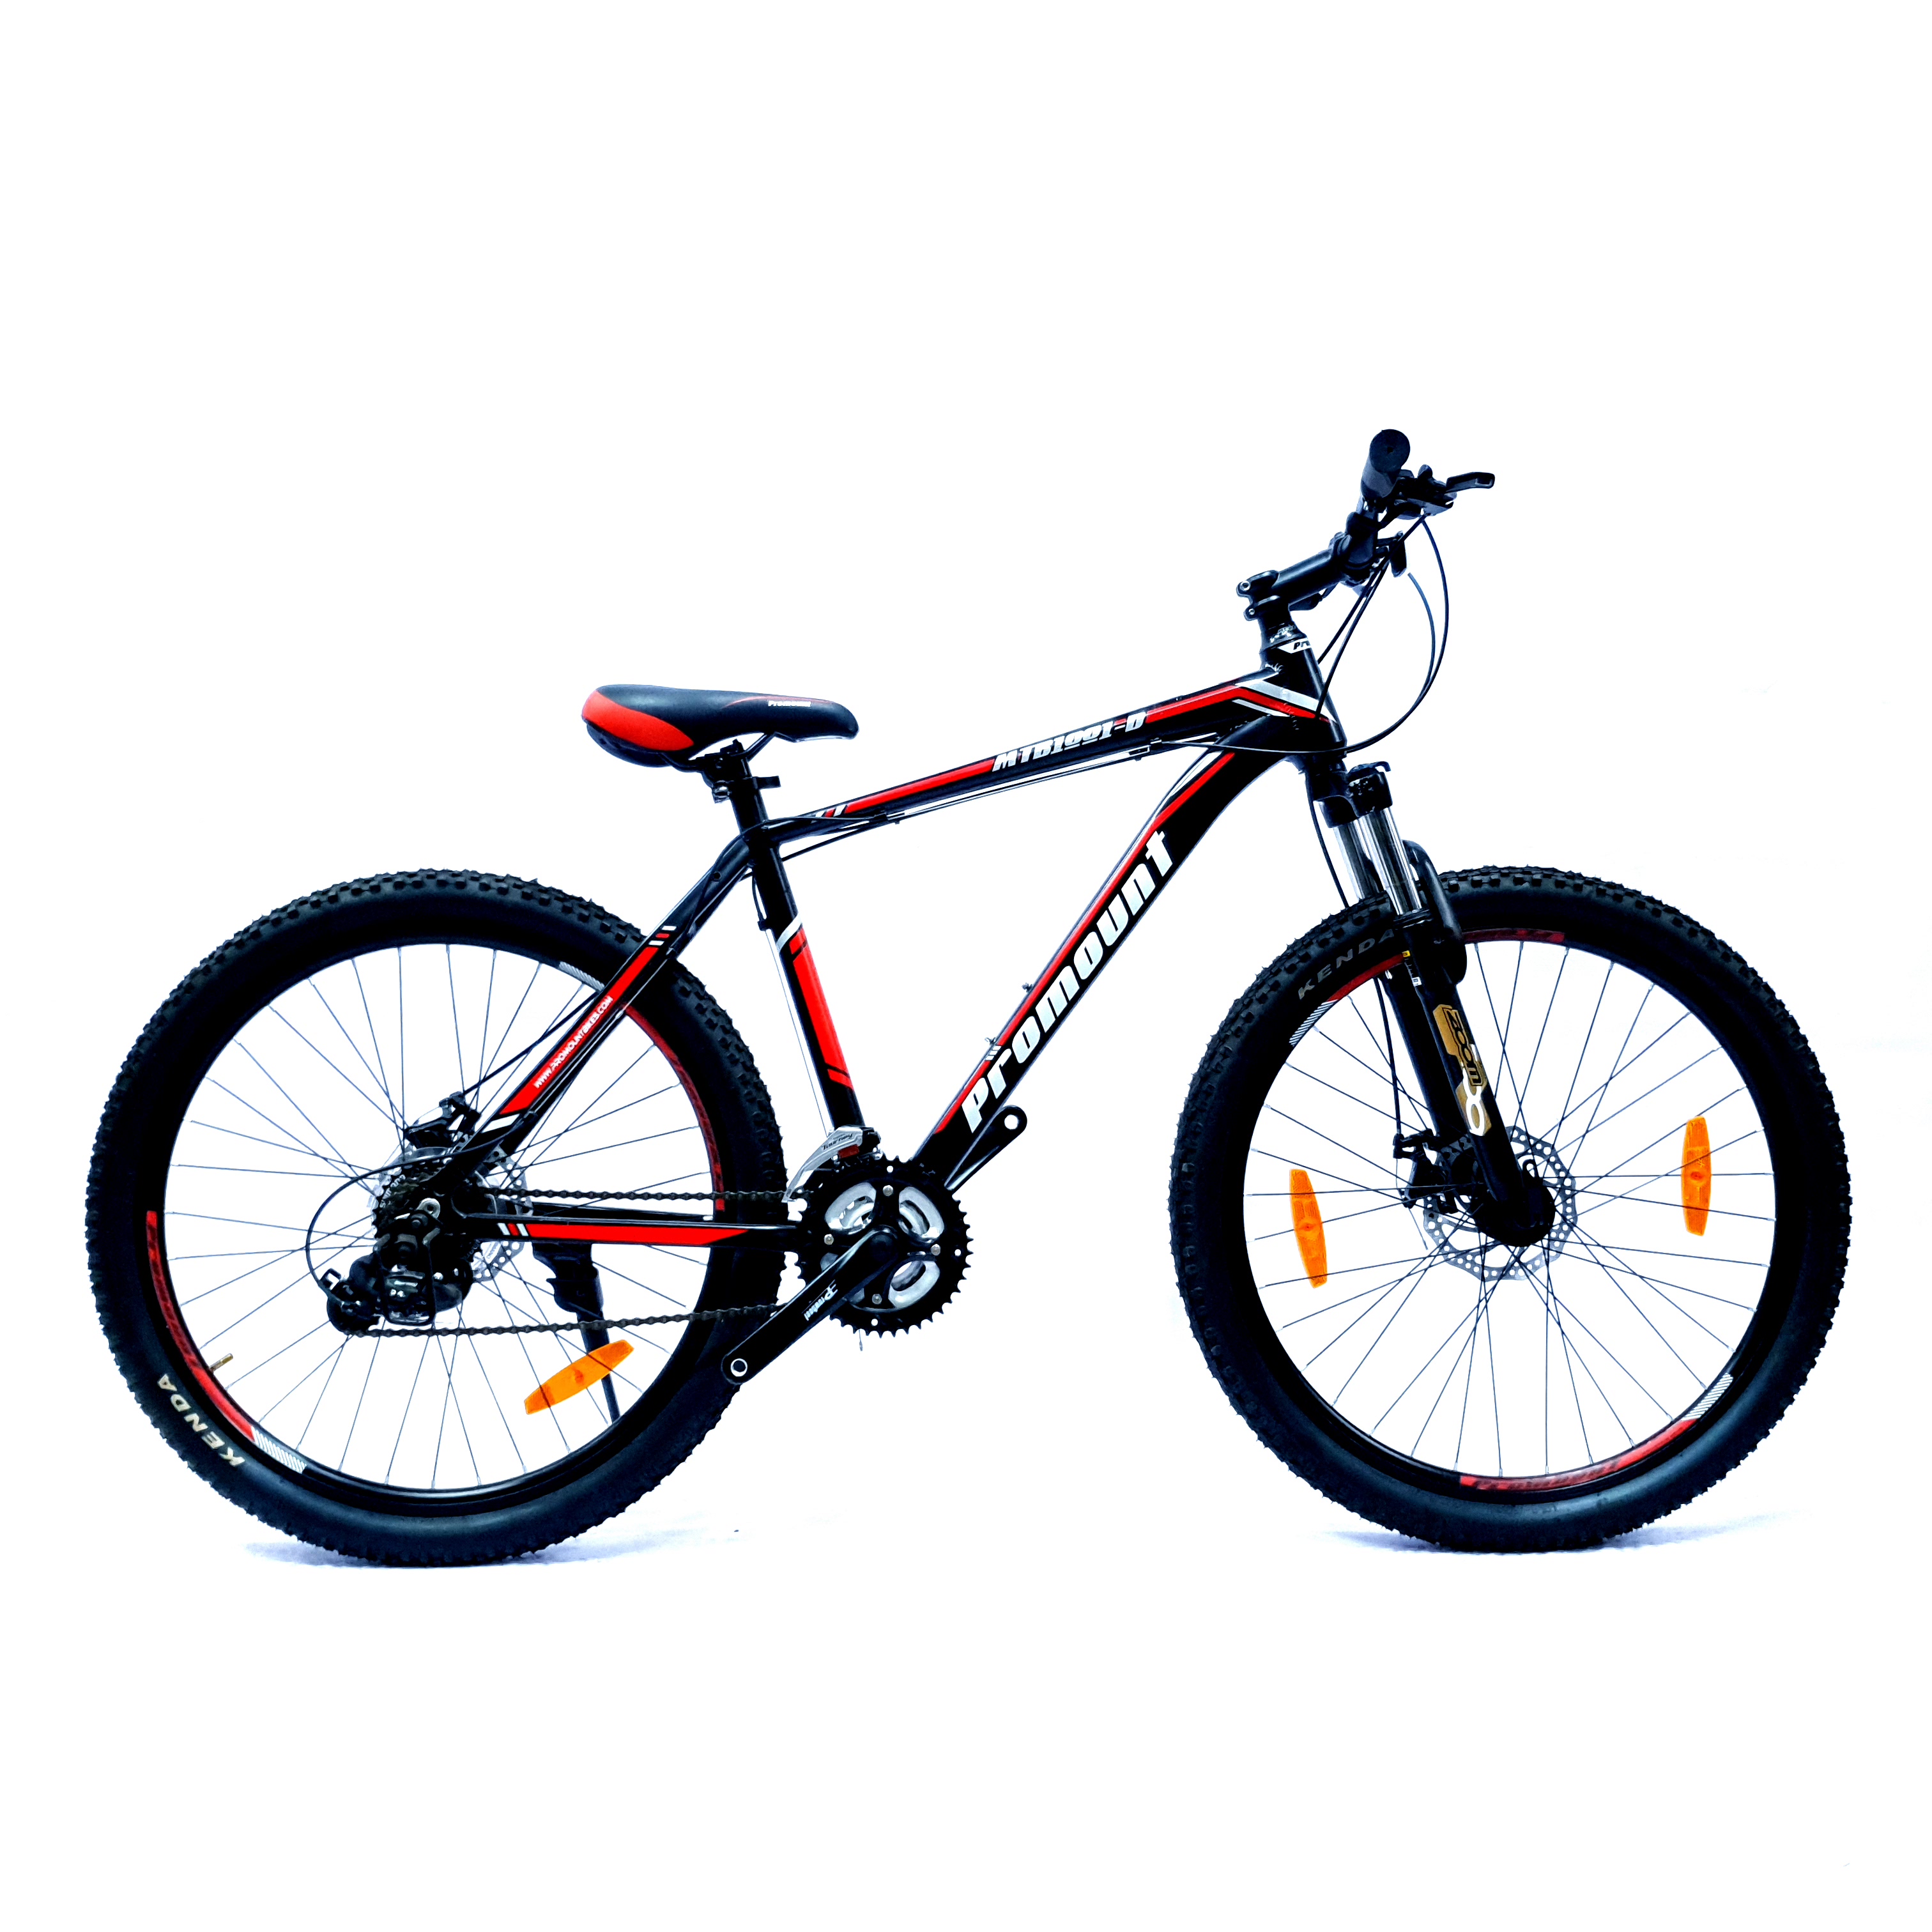 FUNKIER FU-10 21SPEED T Mountain/Hardtail Cycle Price, 46% OFF